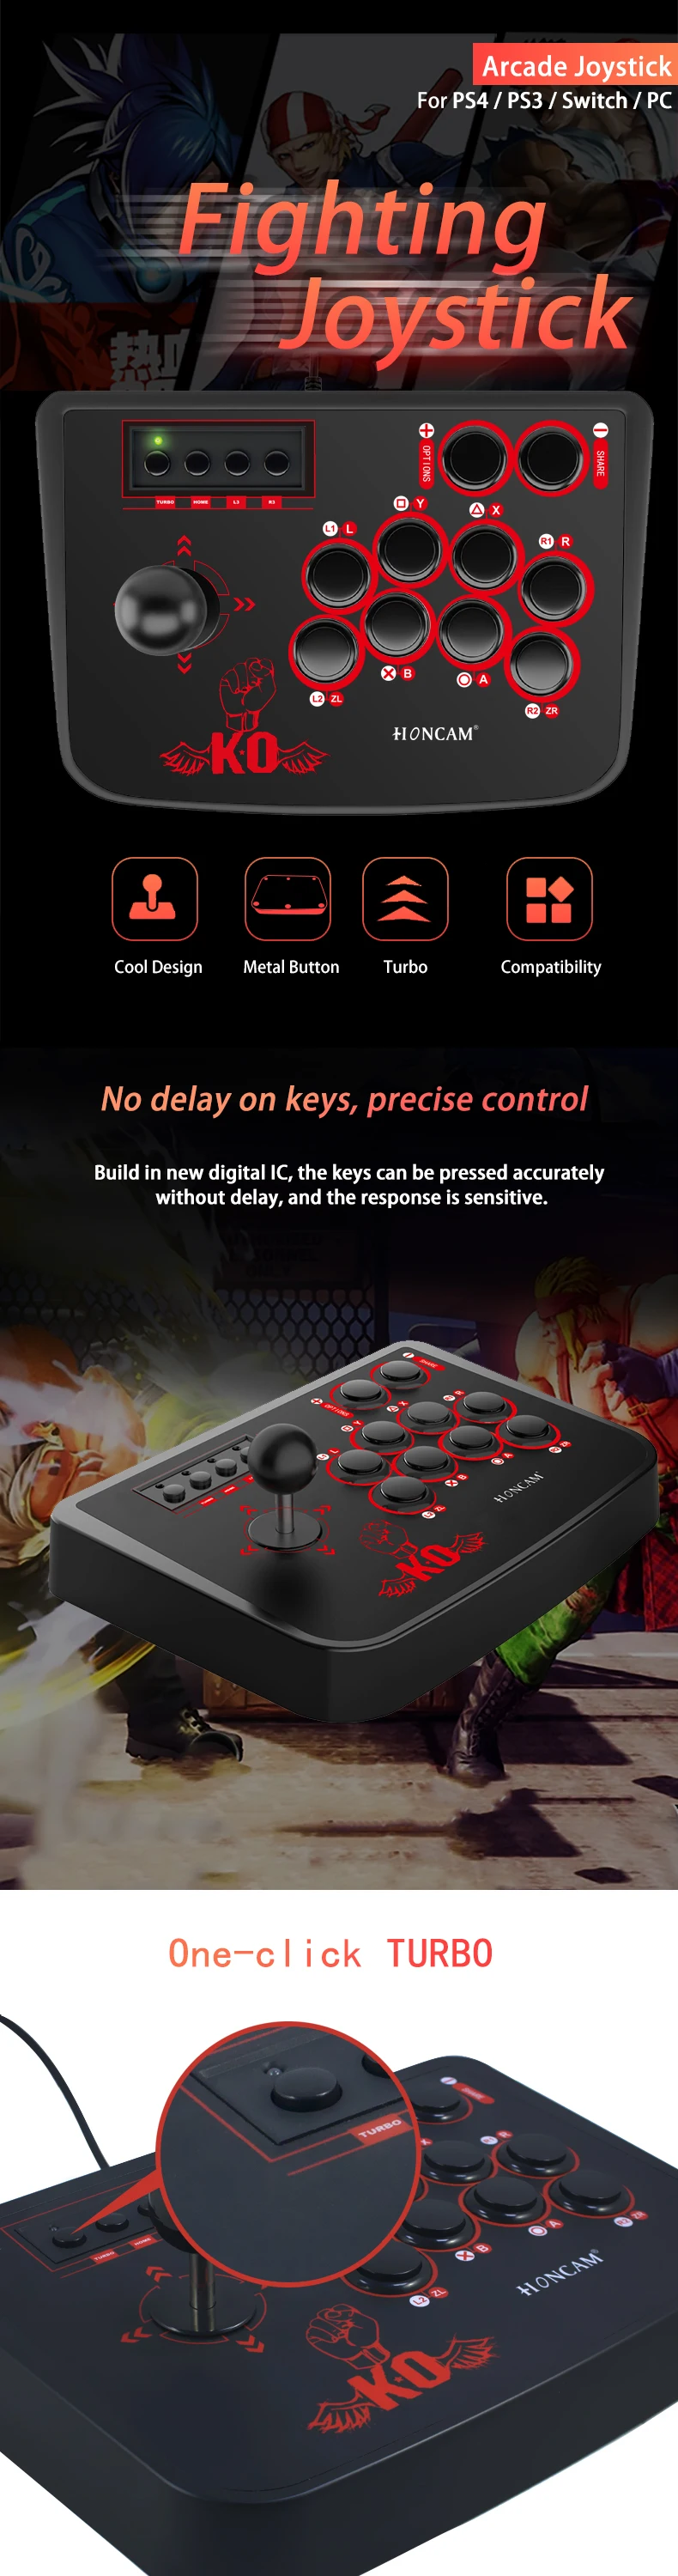  Arcade Game Fighting Joystick with Precise Control